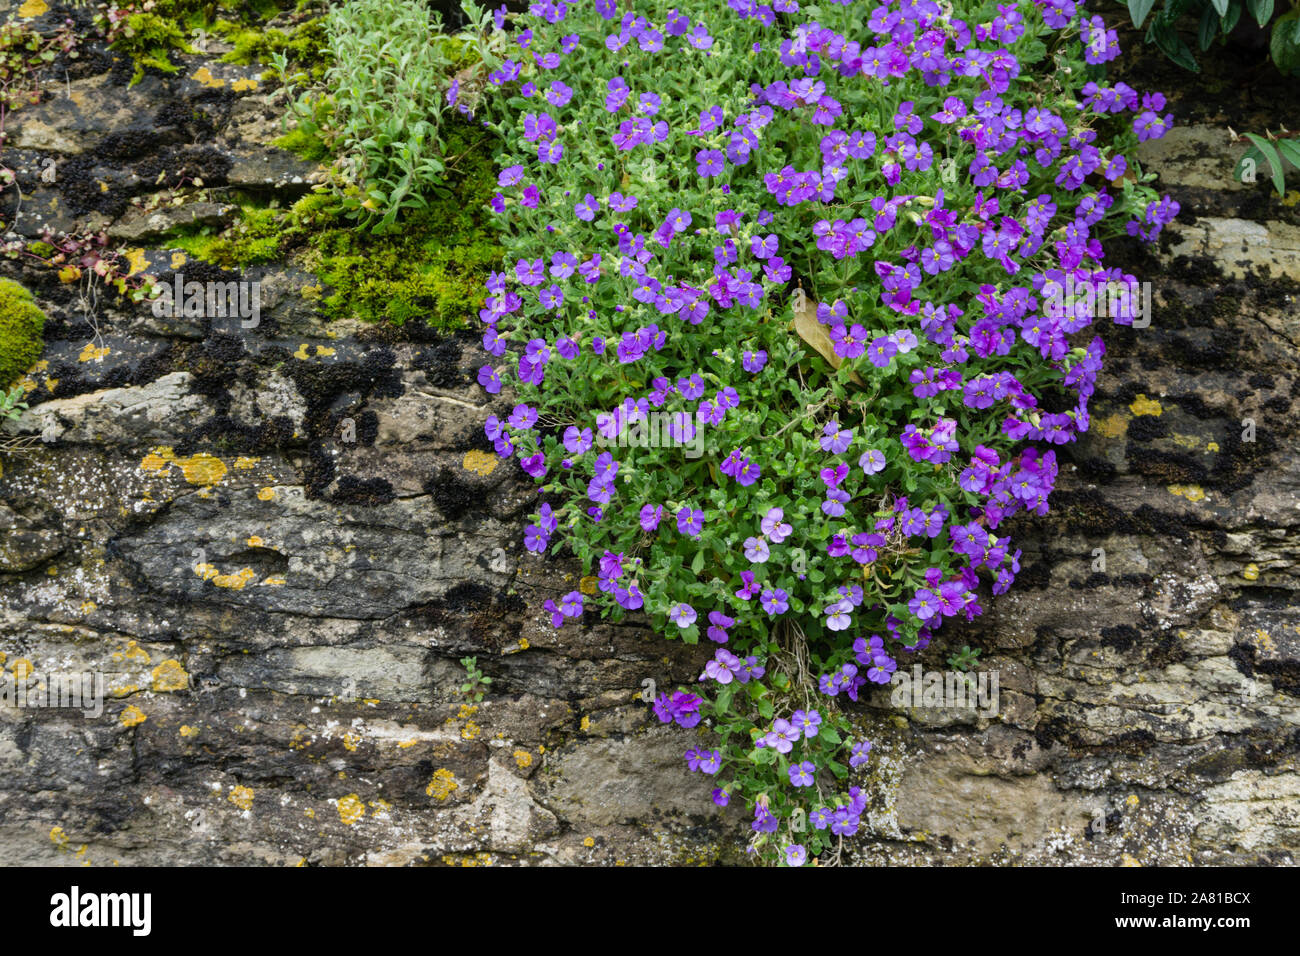 Flowers of the Purple Aubretia plant tumbling down an old stone garden wall, UK Stock Photo